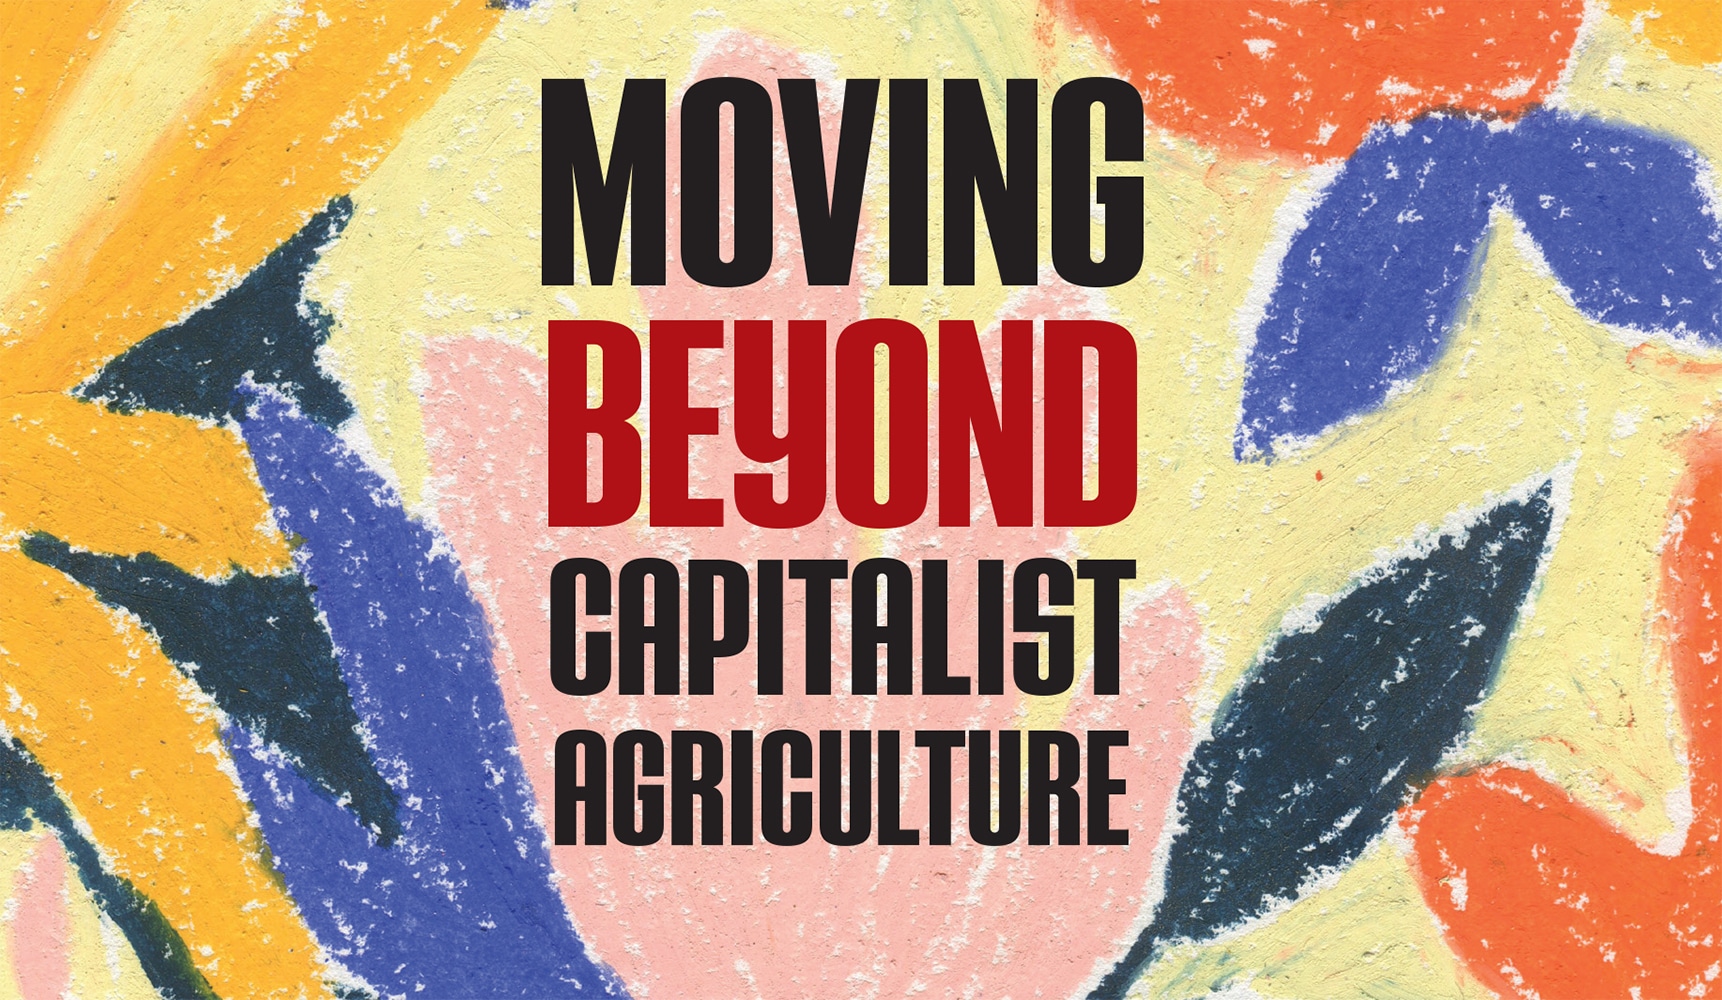 Moving Beyond Capitalist Agriculture